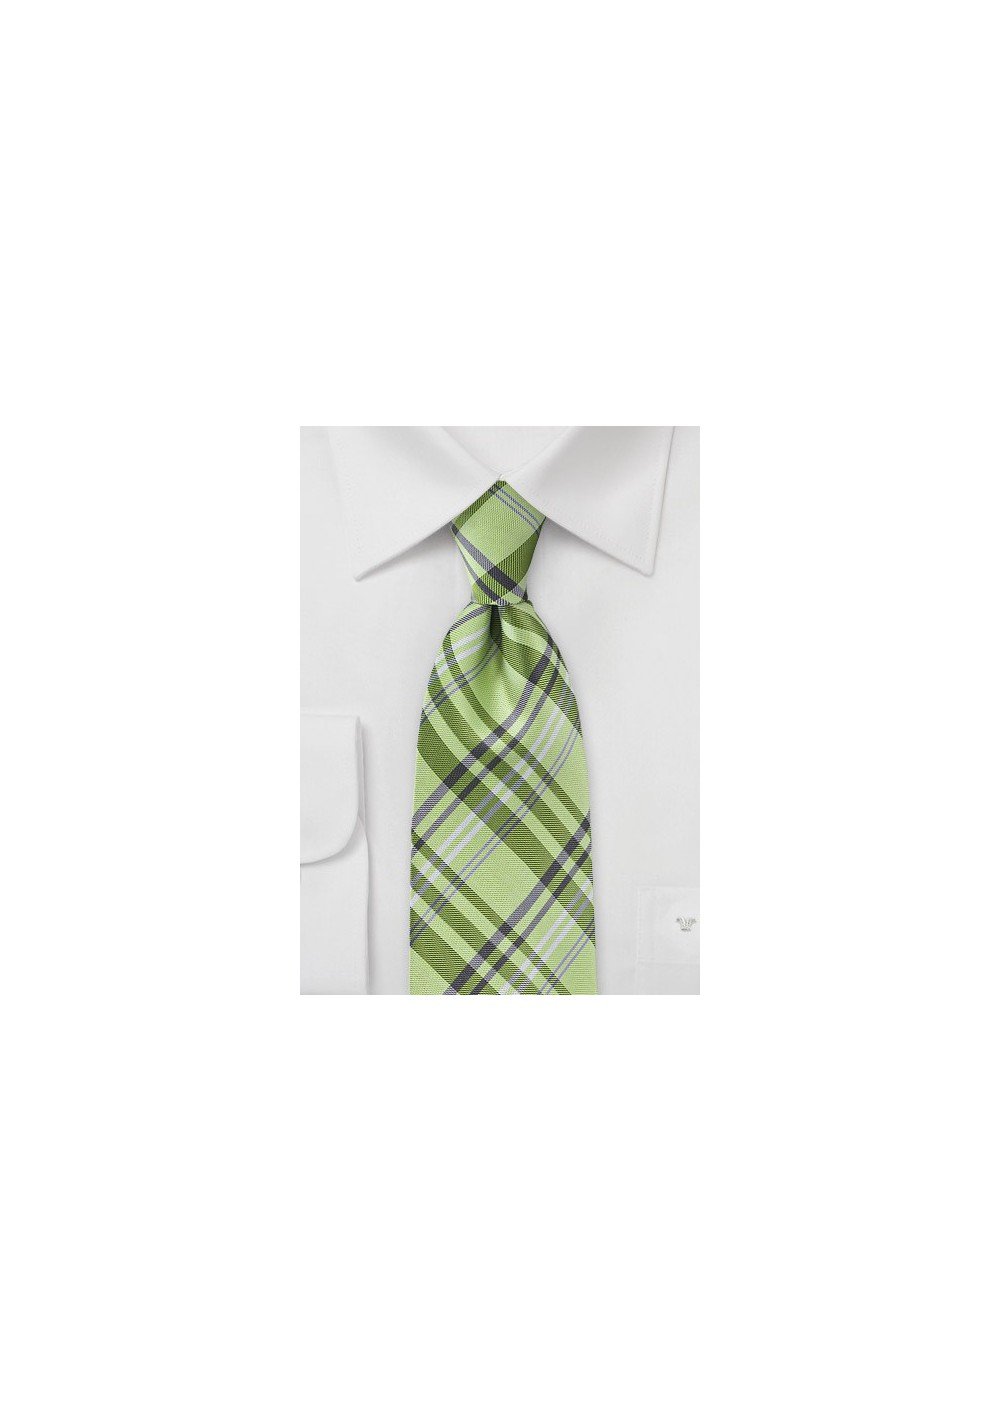 Plaid Tie in a Bright Lime